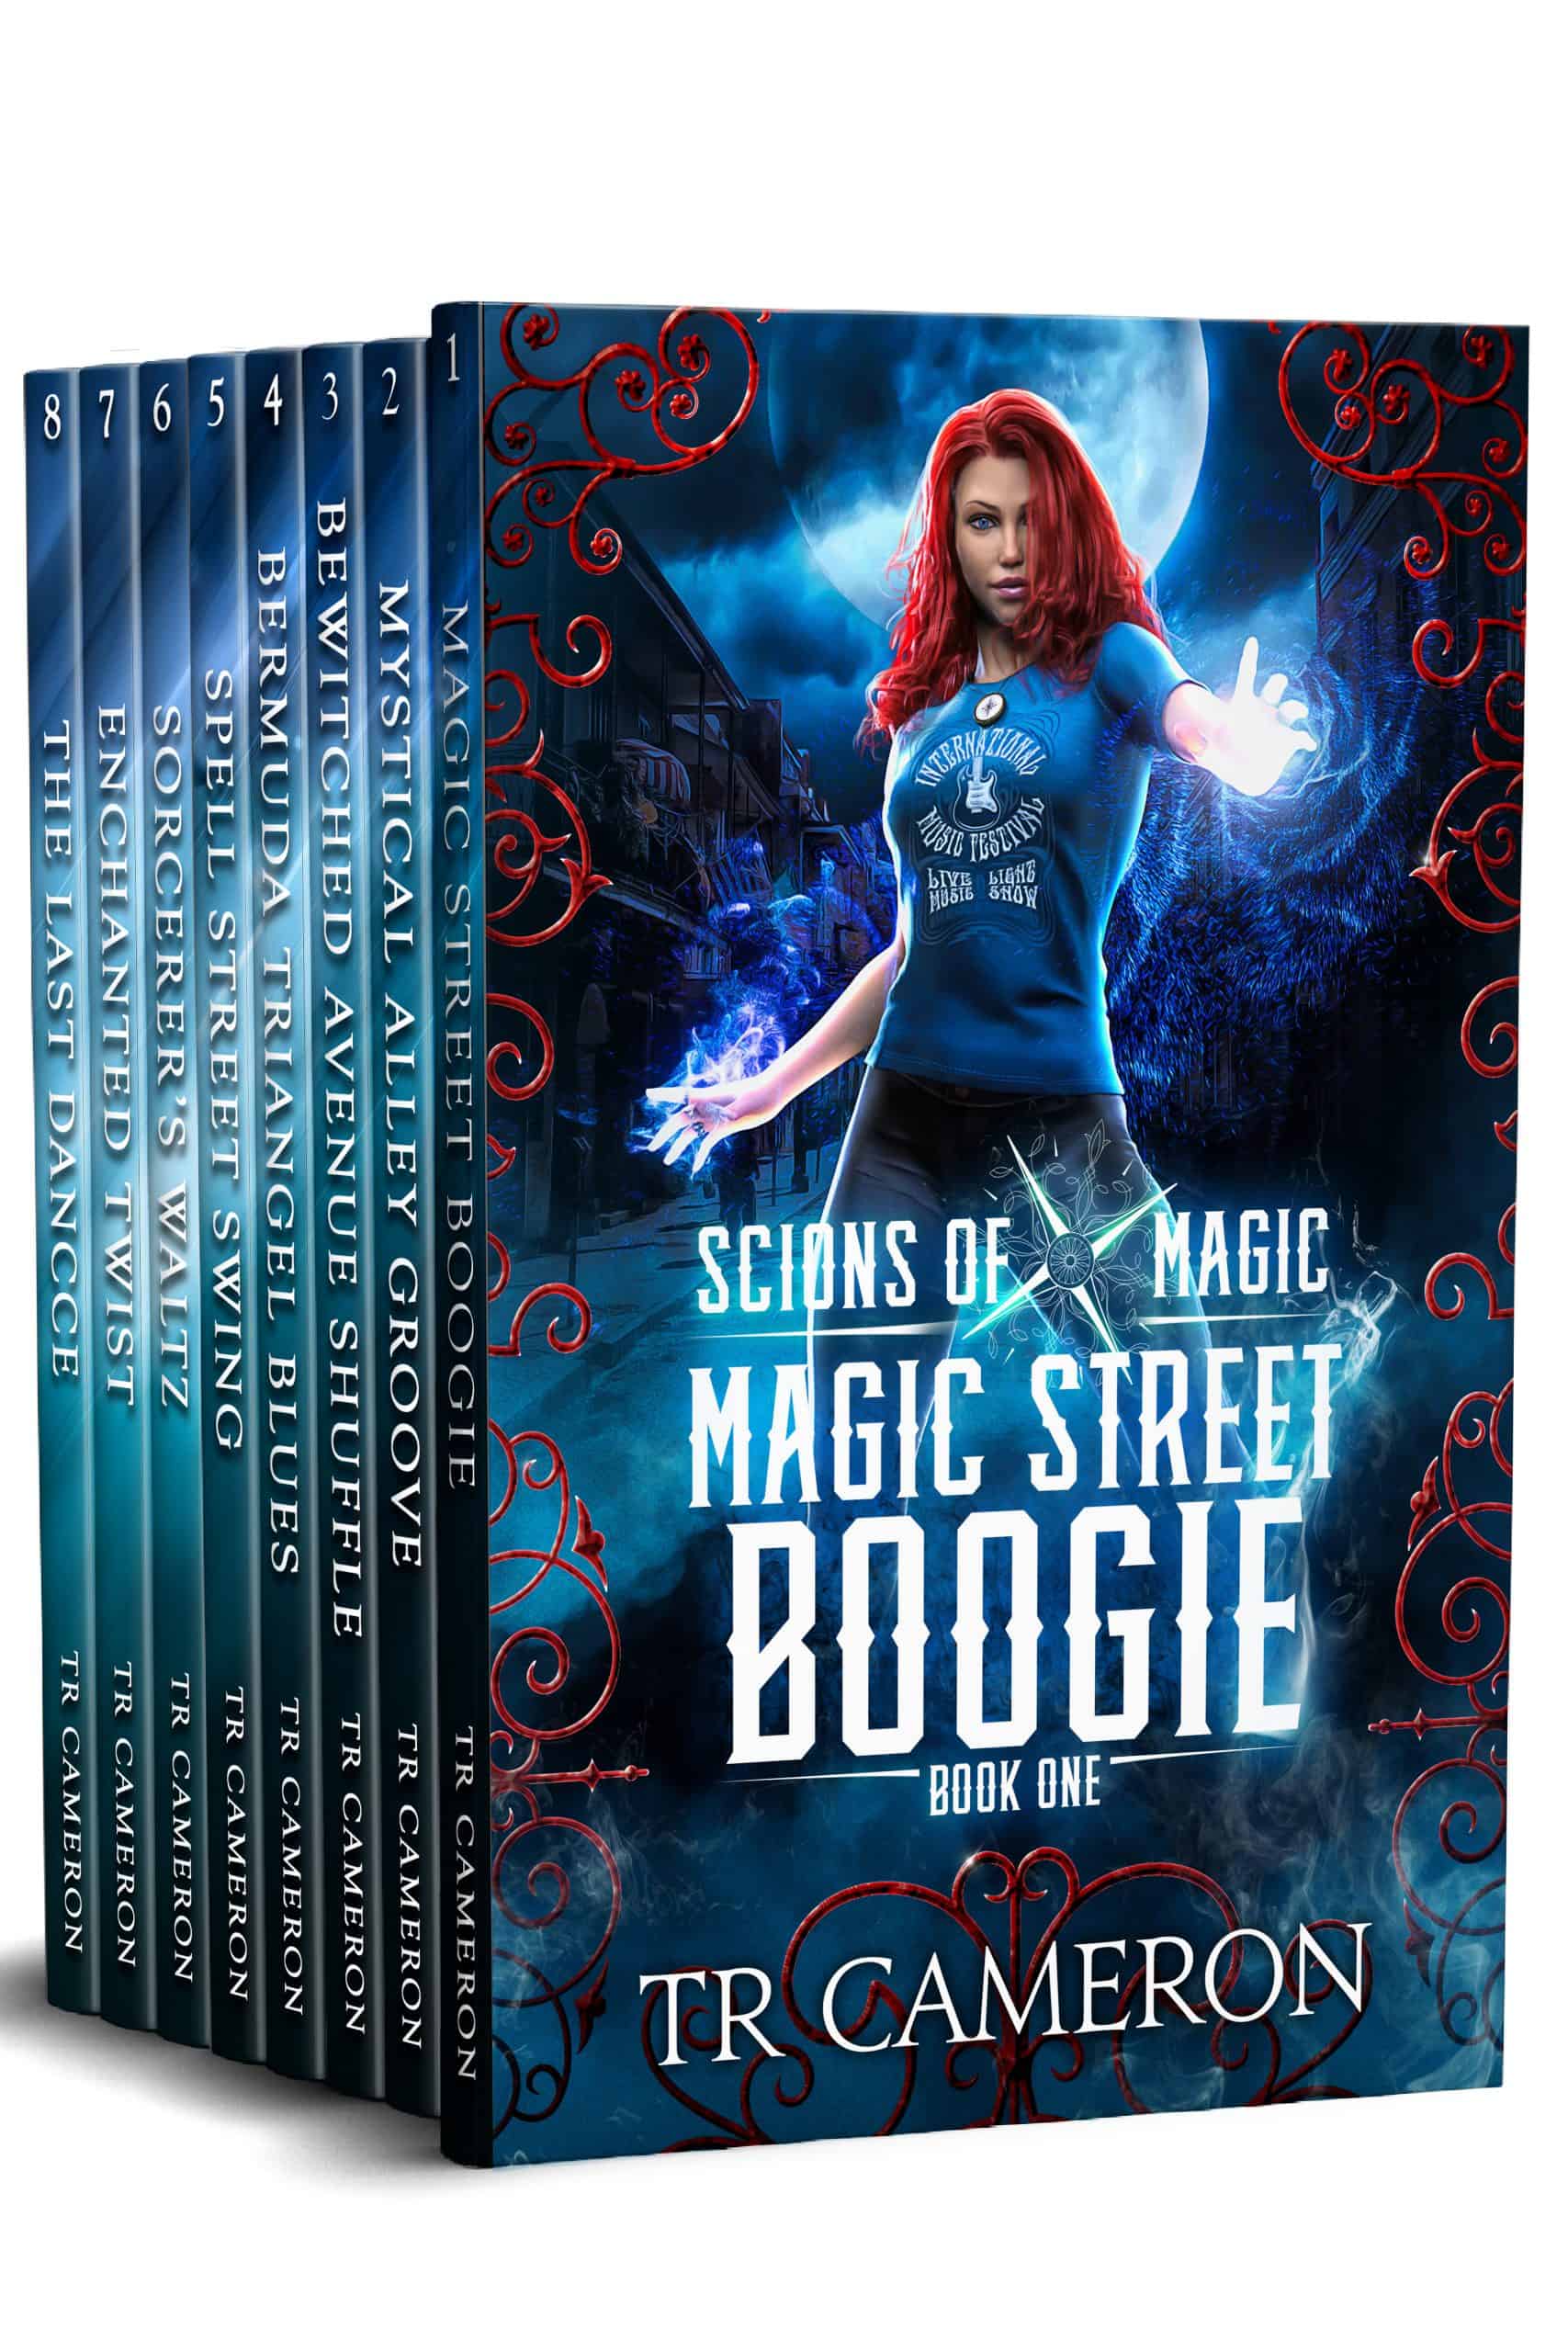 https://mybookcave.com/app/uploads/book_covers1/2021/01/Scions-of-Magic-Complete-Series-Boxed-Set-scaled.jpg